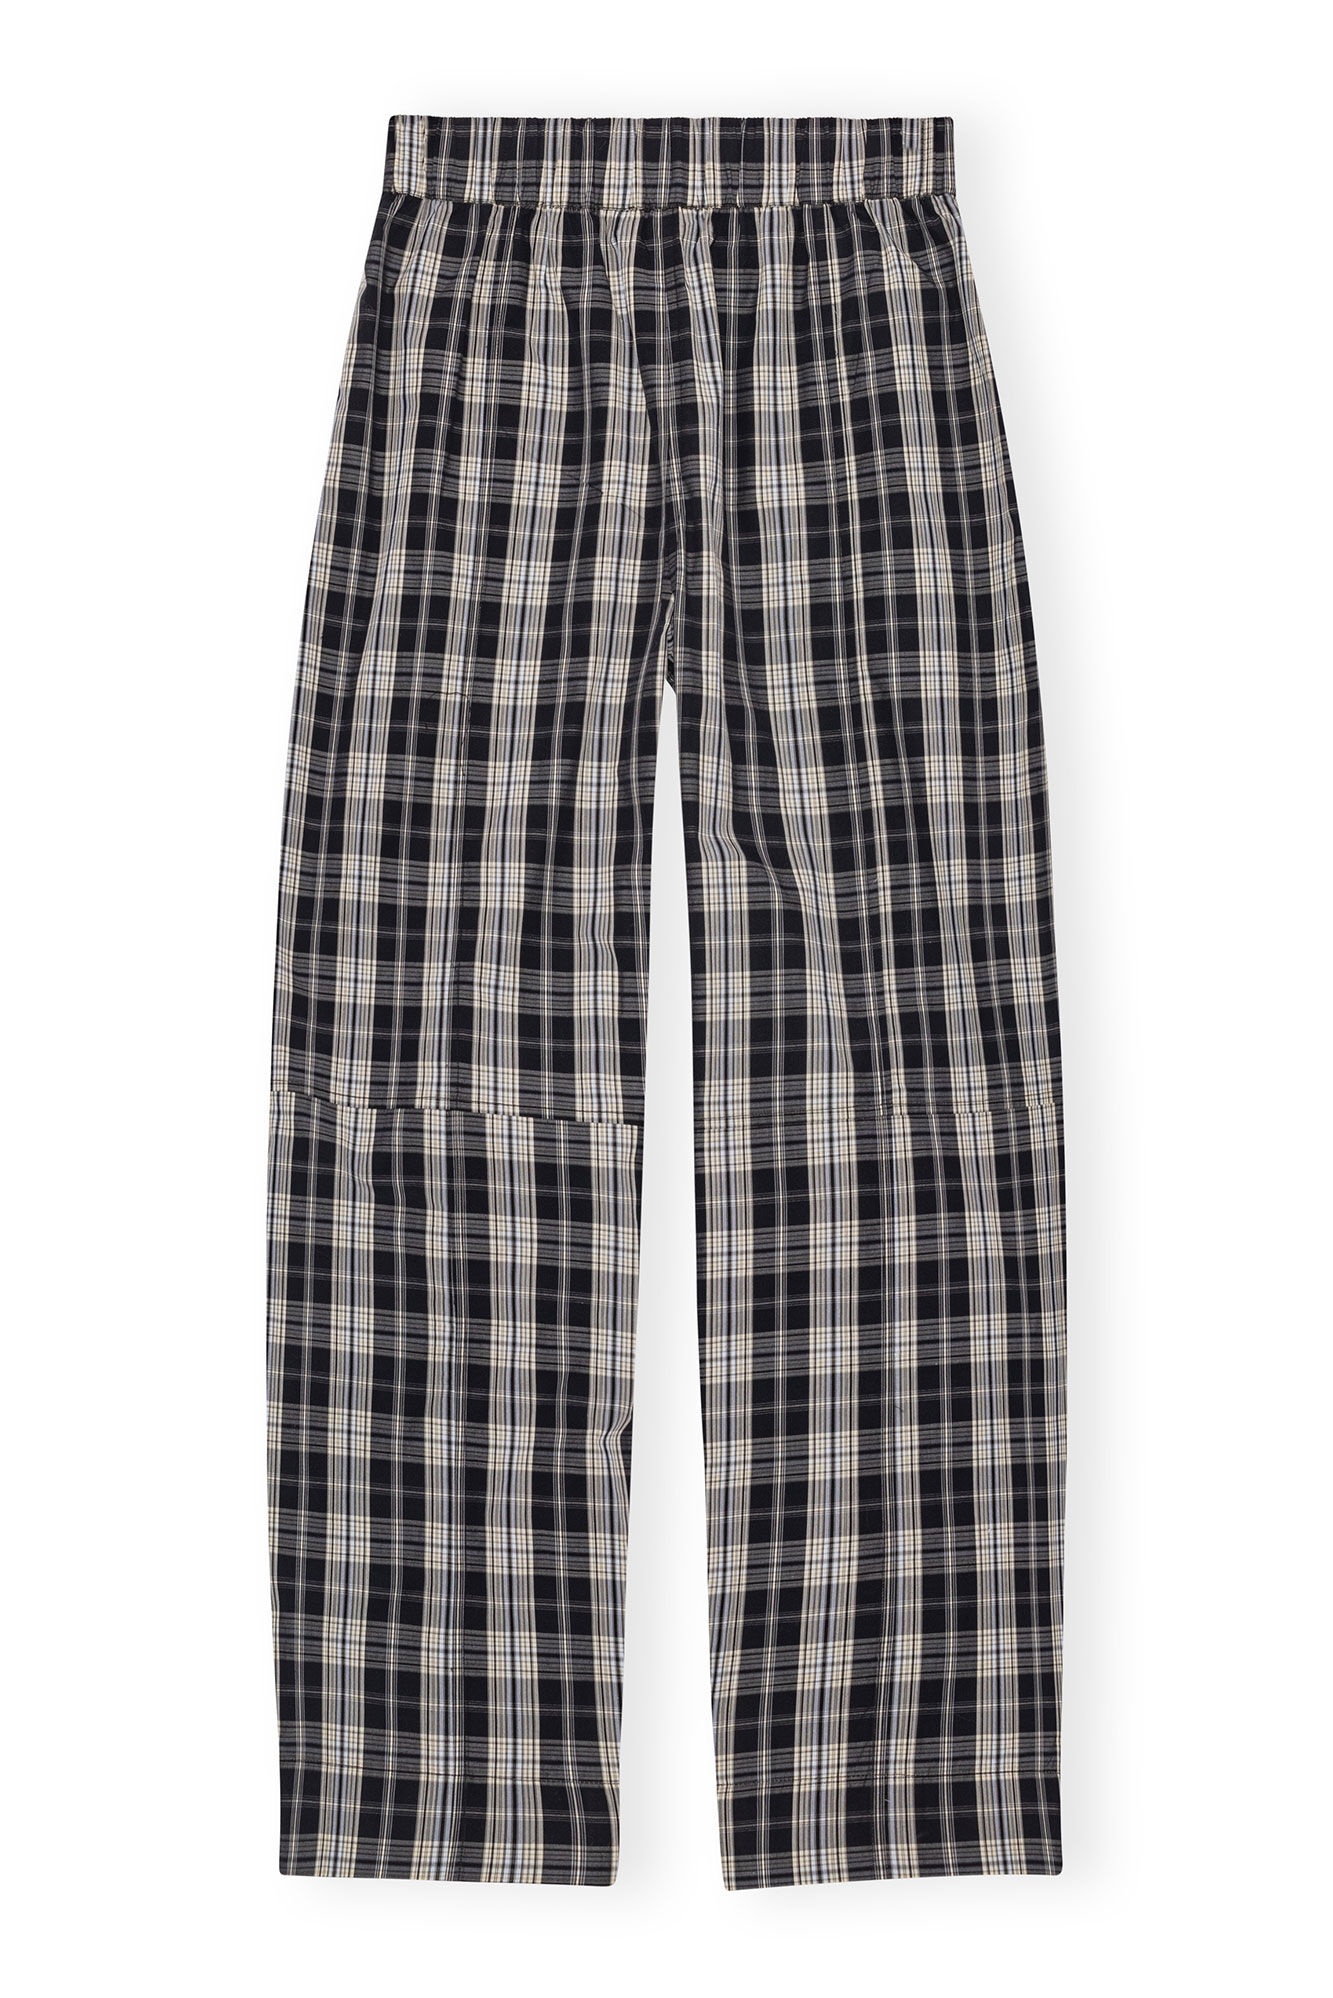 CHECKERED COTTON ELASTICATED CURVE PANTS - 1